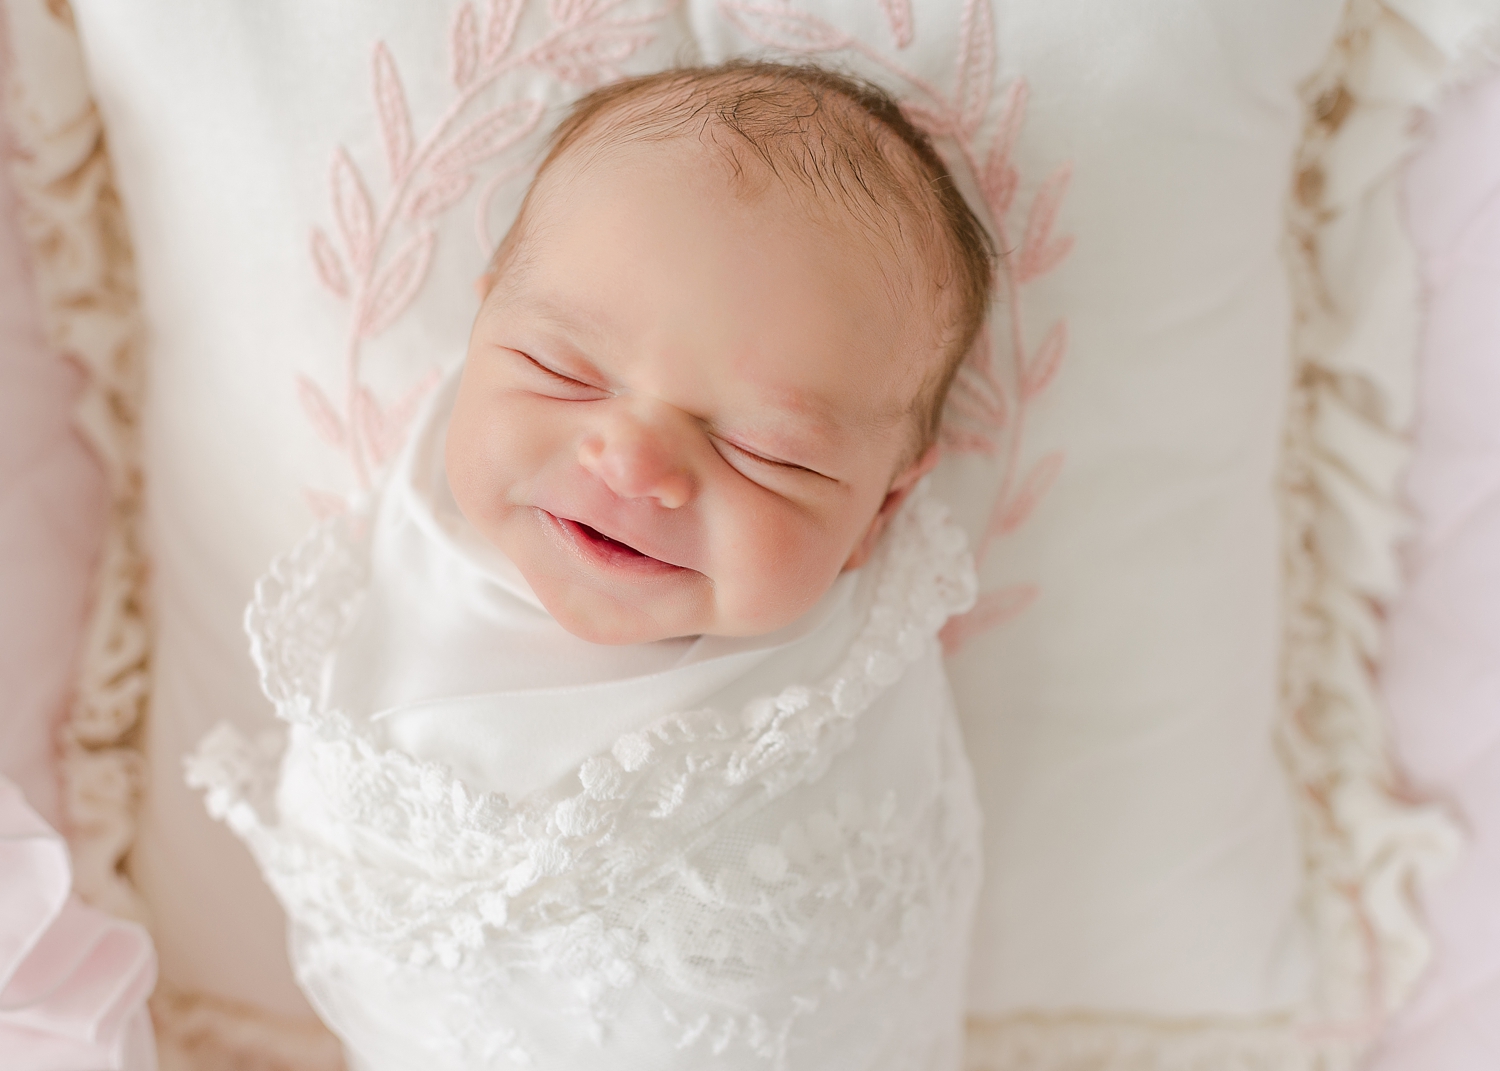 newborn baby girl wrapped in white lace blanket laying basket smiling